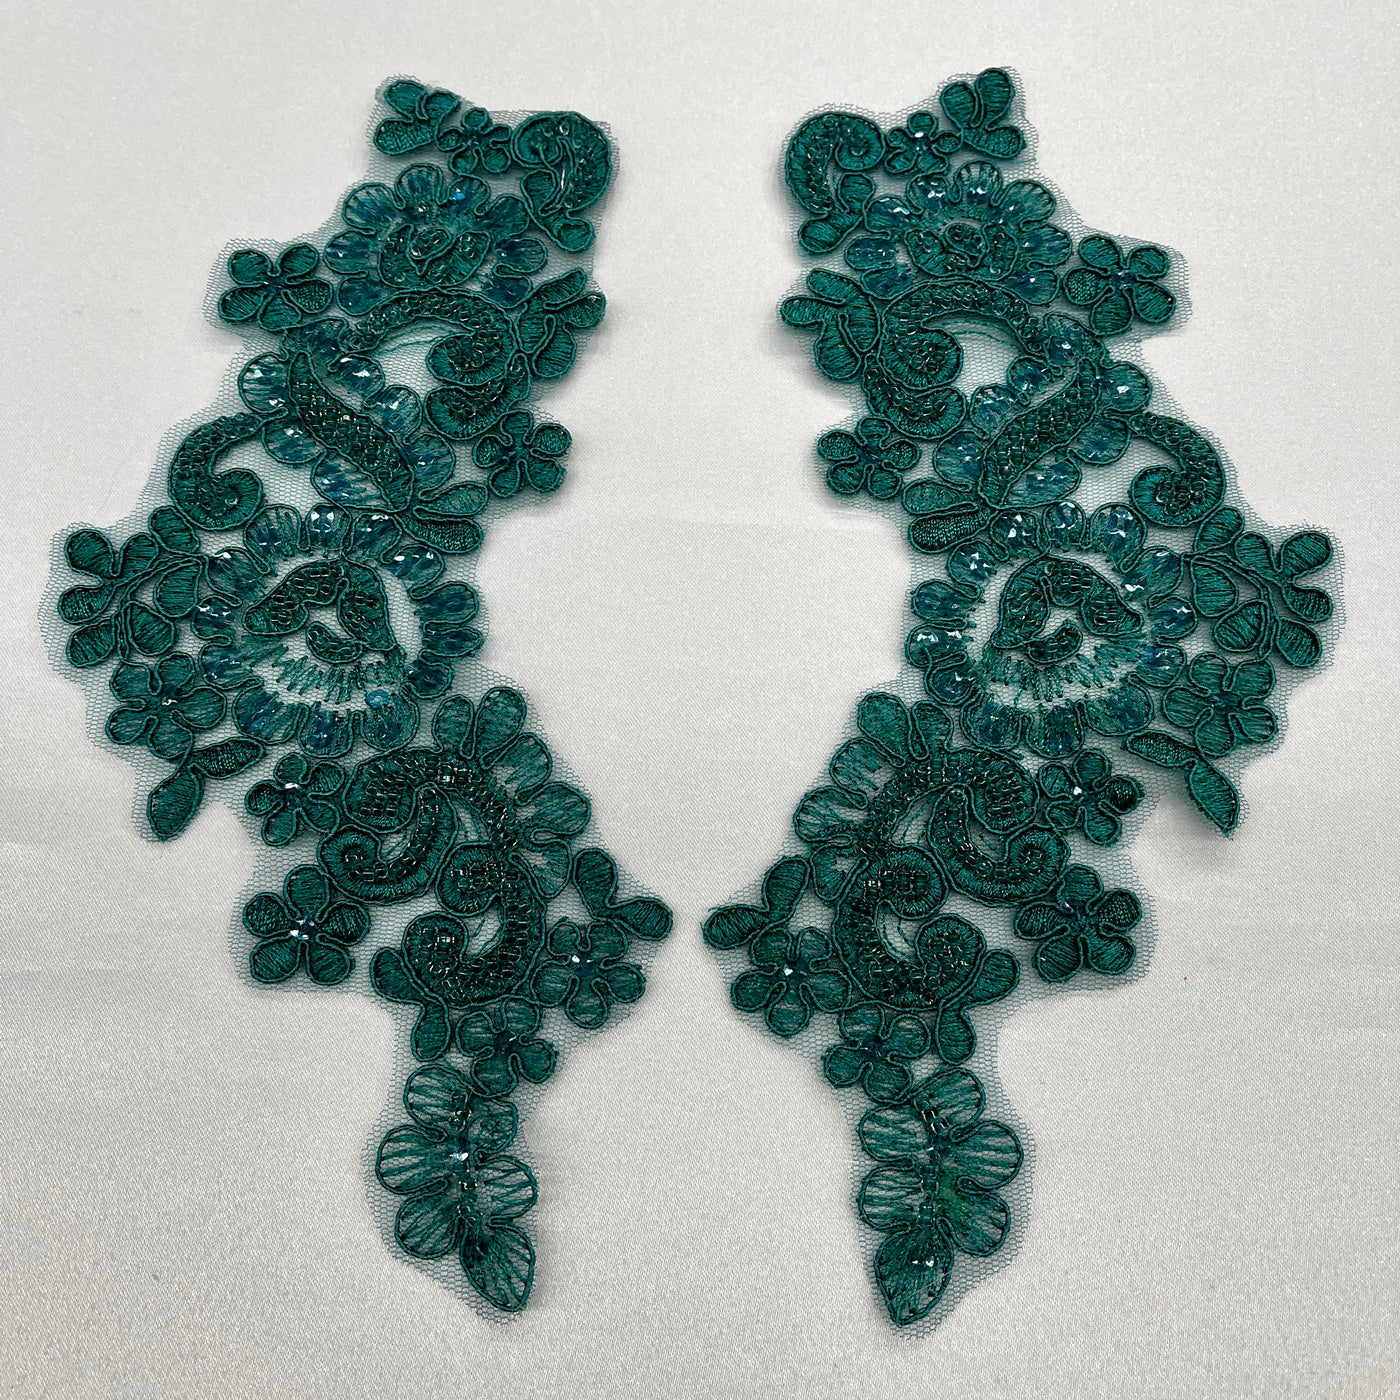 Beaded & Corded Floral Lace Applique Embroidered on 100% Polyester | Lace USA